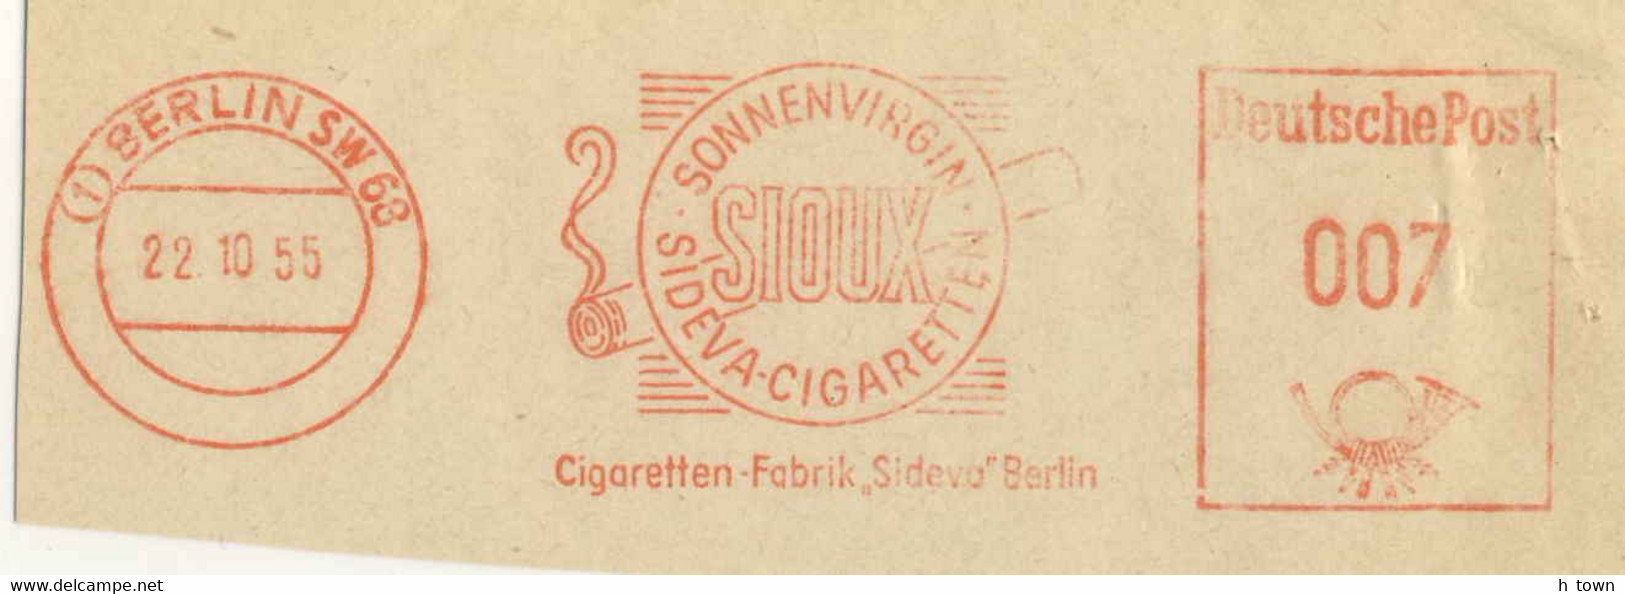 125  Tabac, Cigarette: Ema D'Allemagne, 1955 - Tobacco Meter Stamp From Germany. Sioux Berlin SW 68 - Drugs